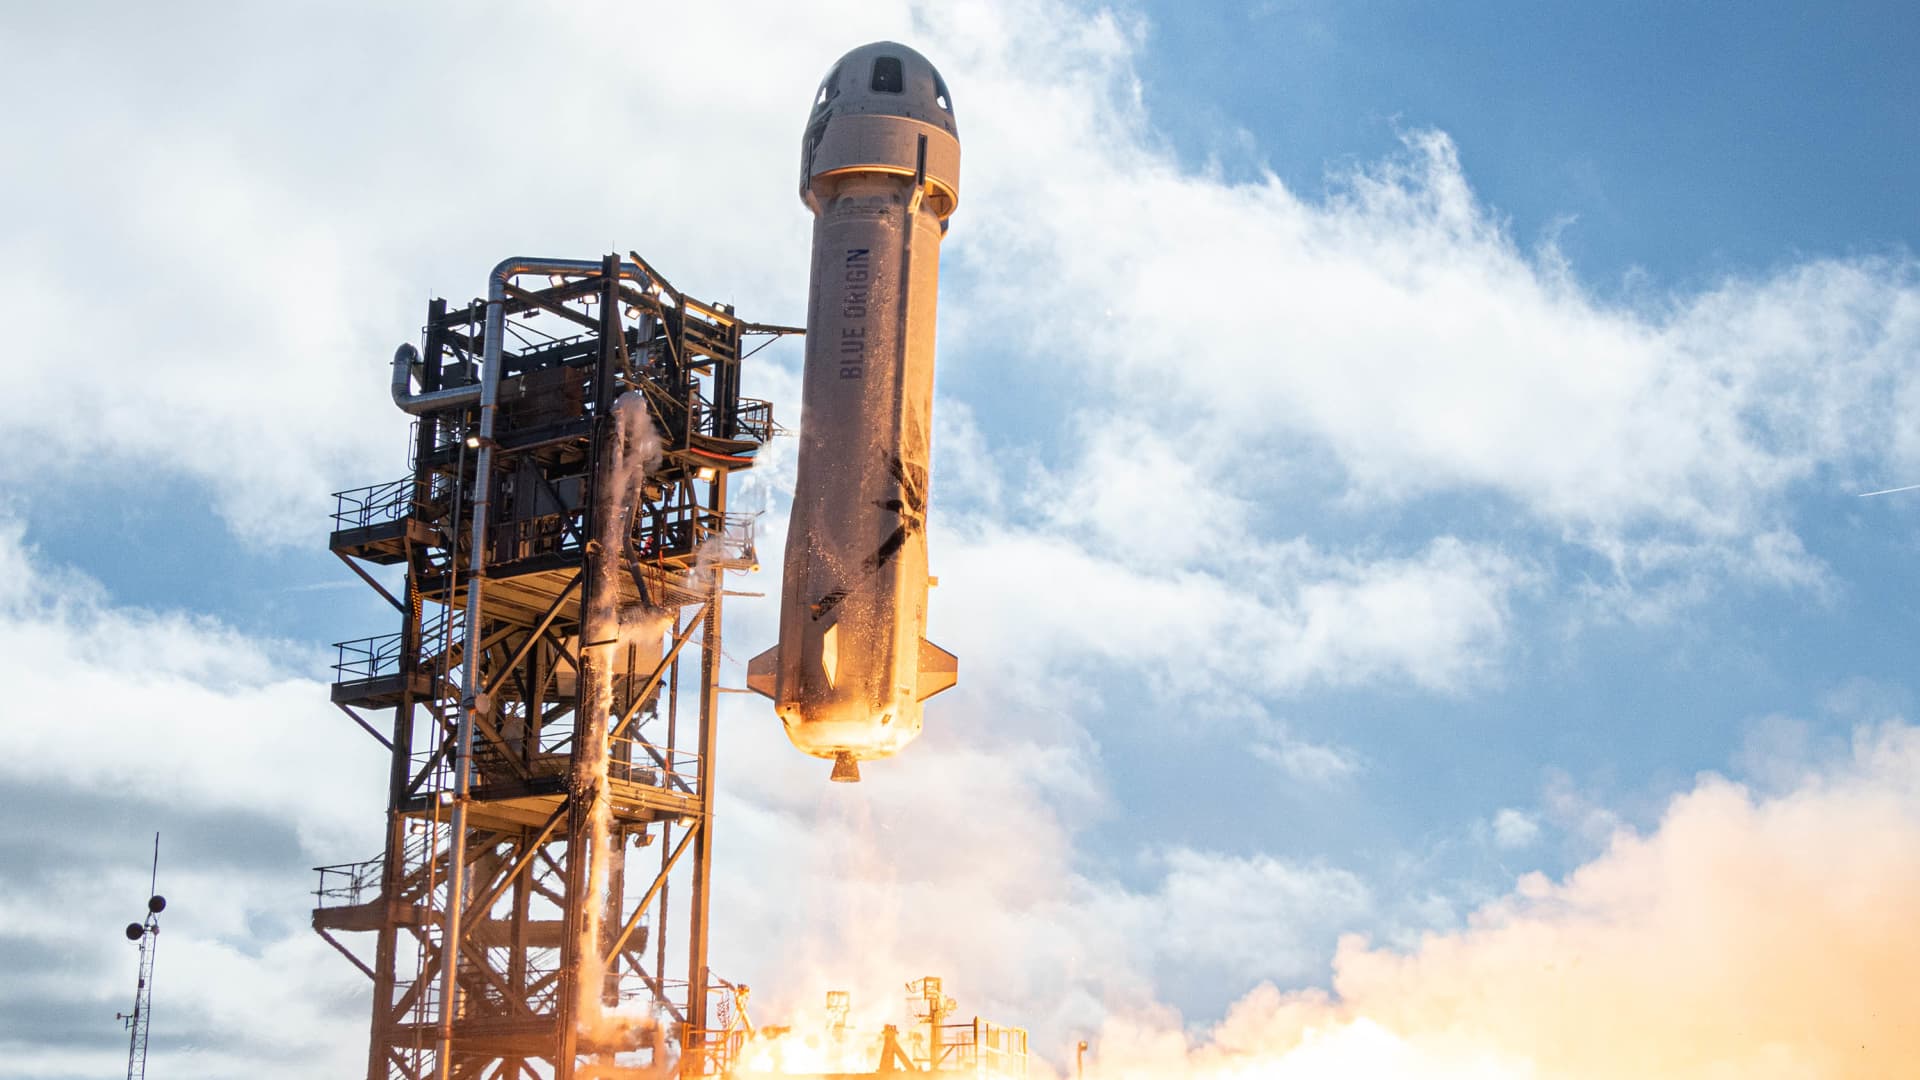 Bezos' Space Firm Successfully Tests Capsule Safety, Lands Rocket